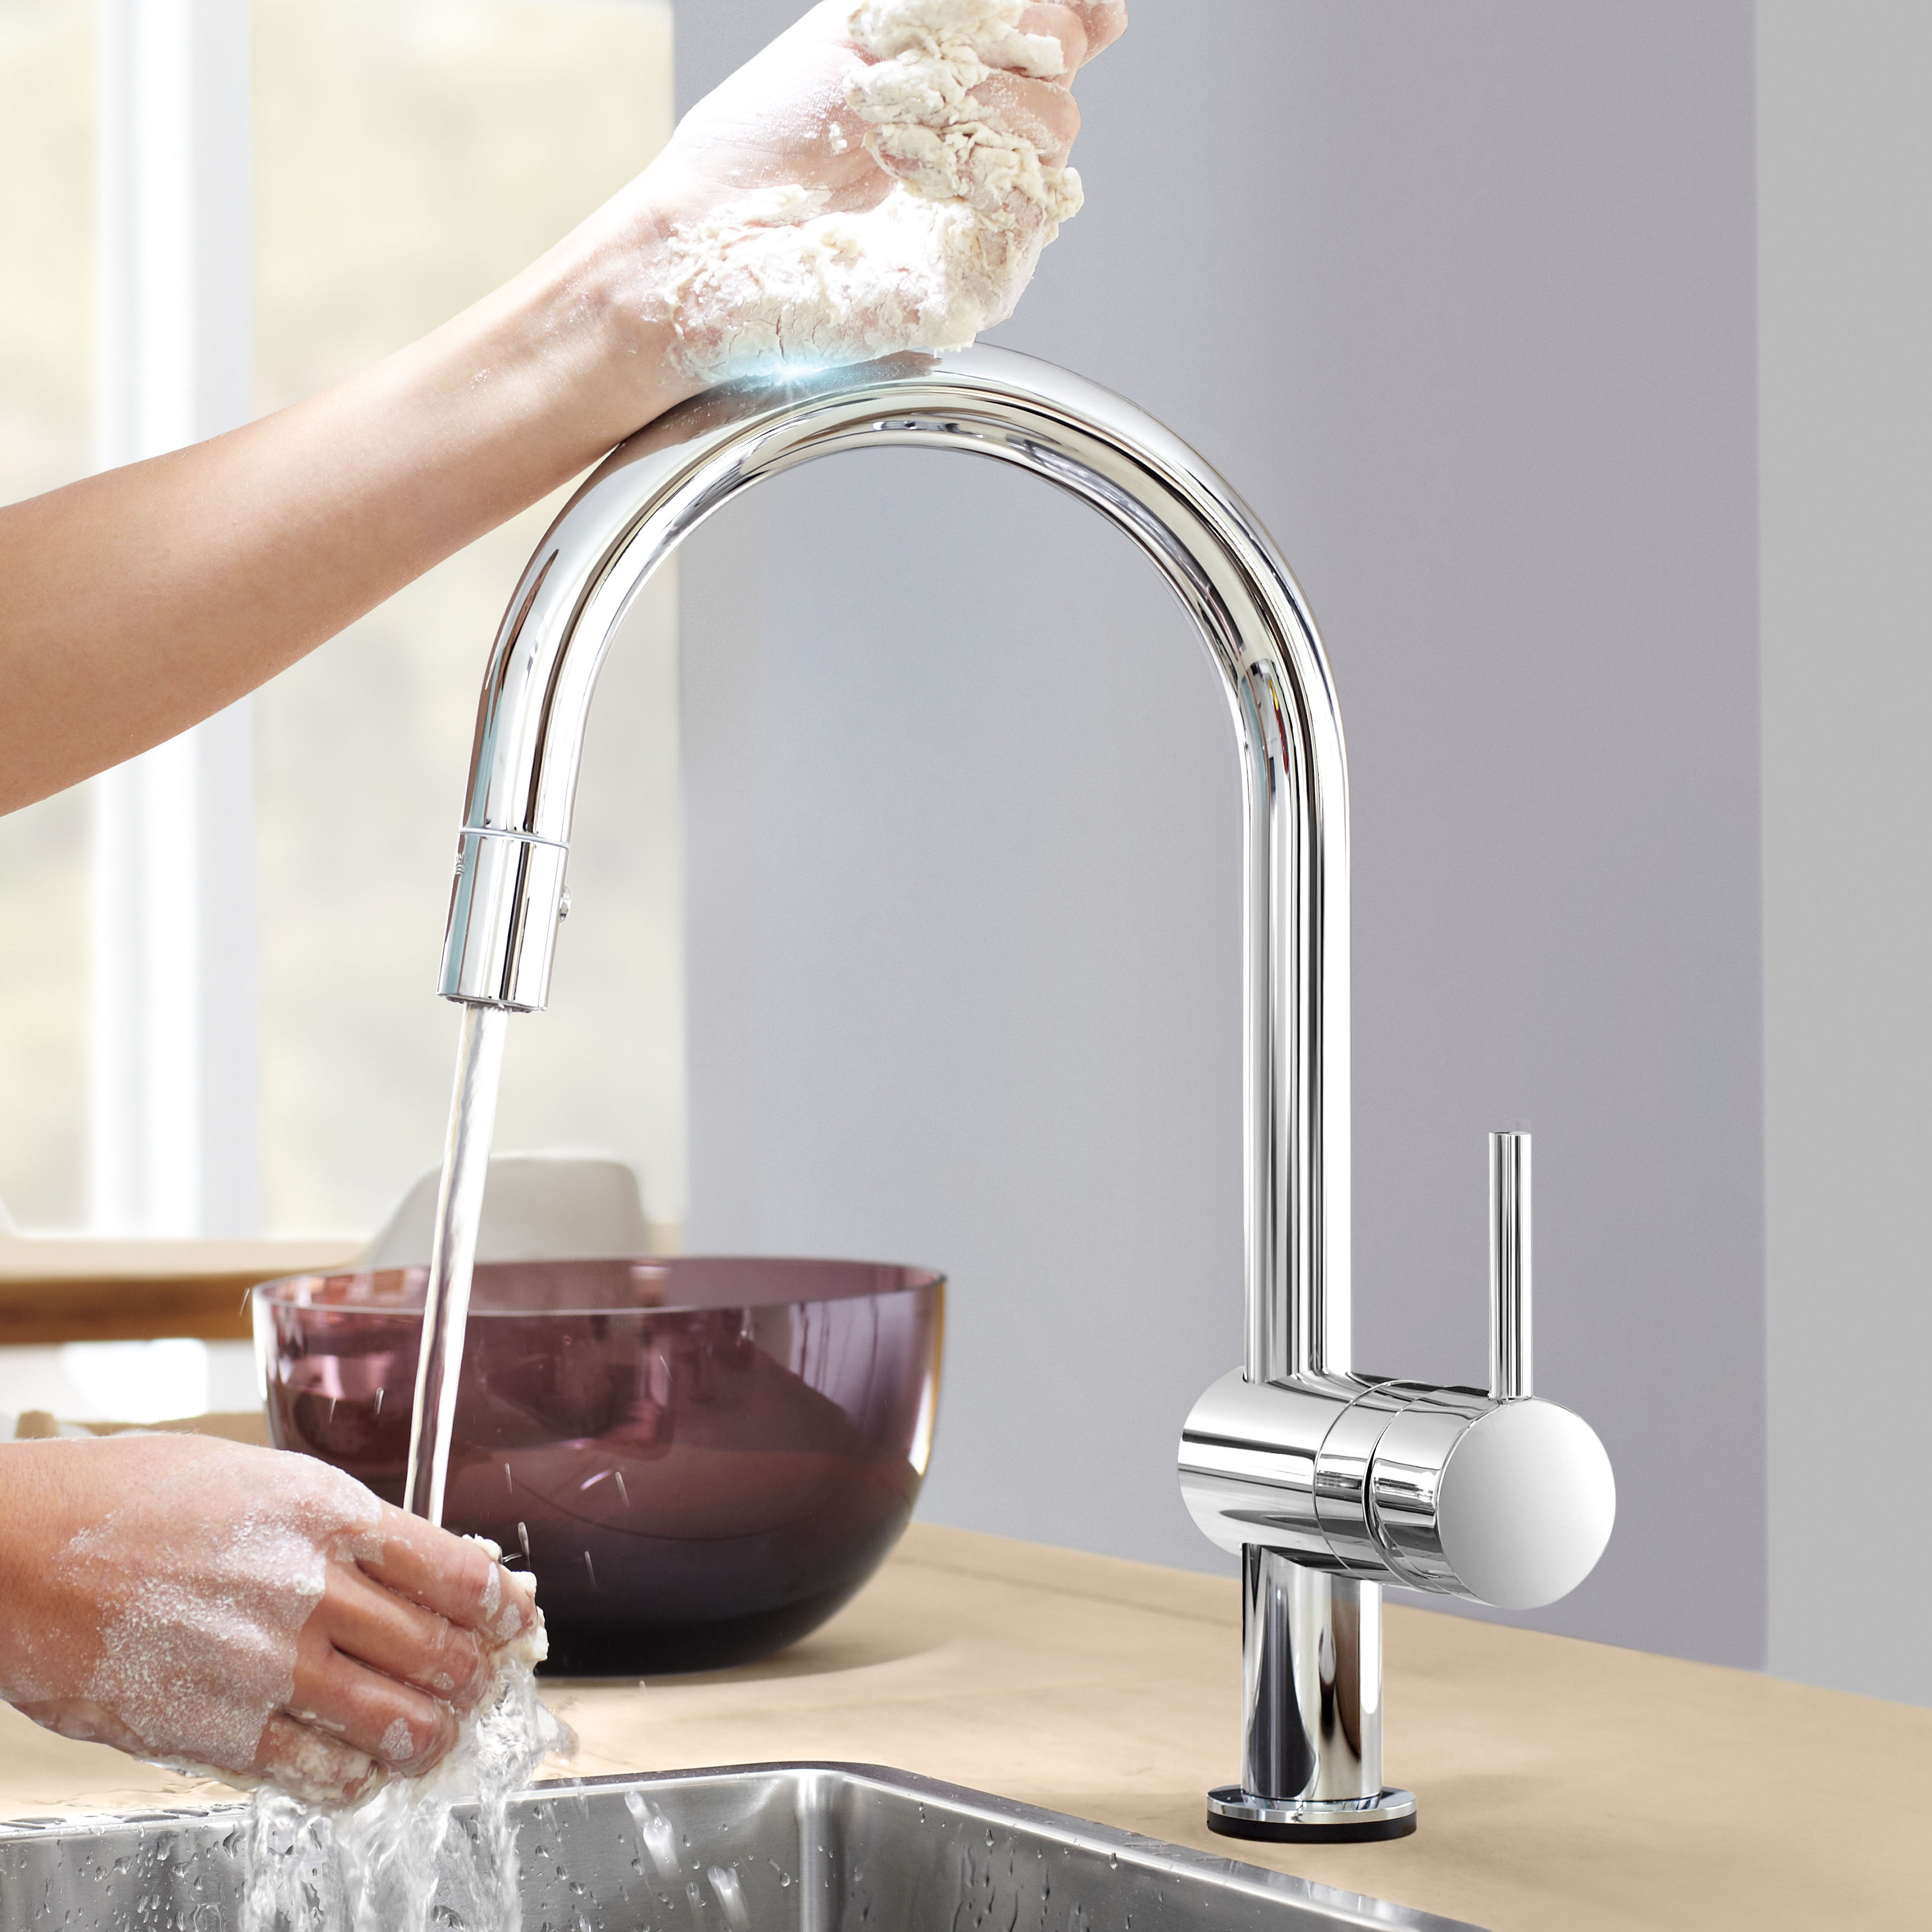 What types of faucet lines are available from Grohe?